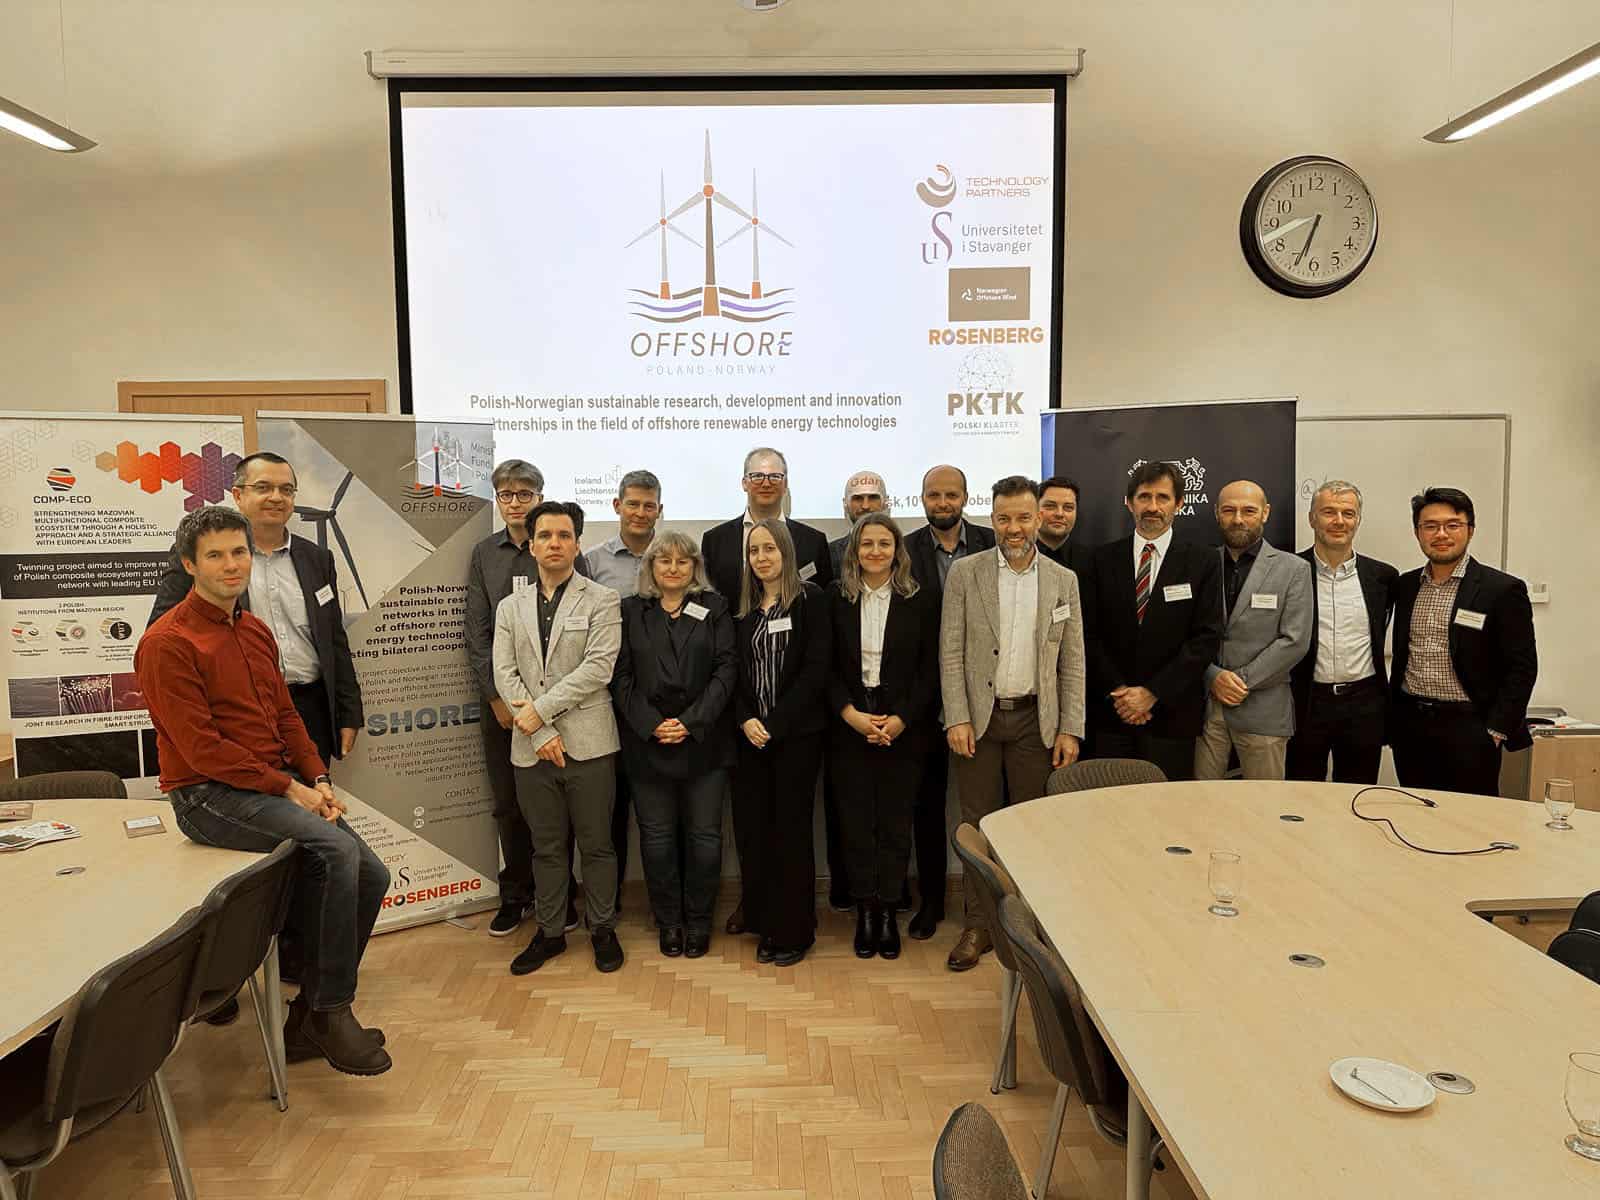 Workshop devoted to the "OFFSHORE" project